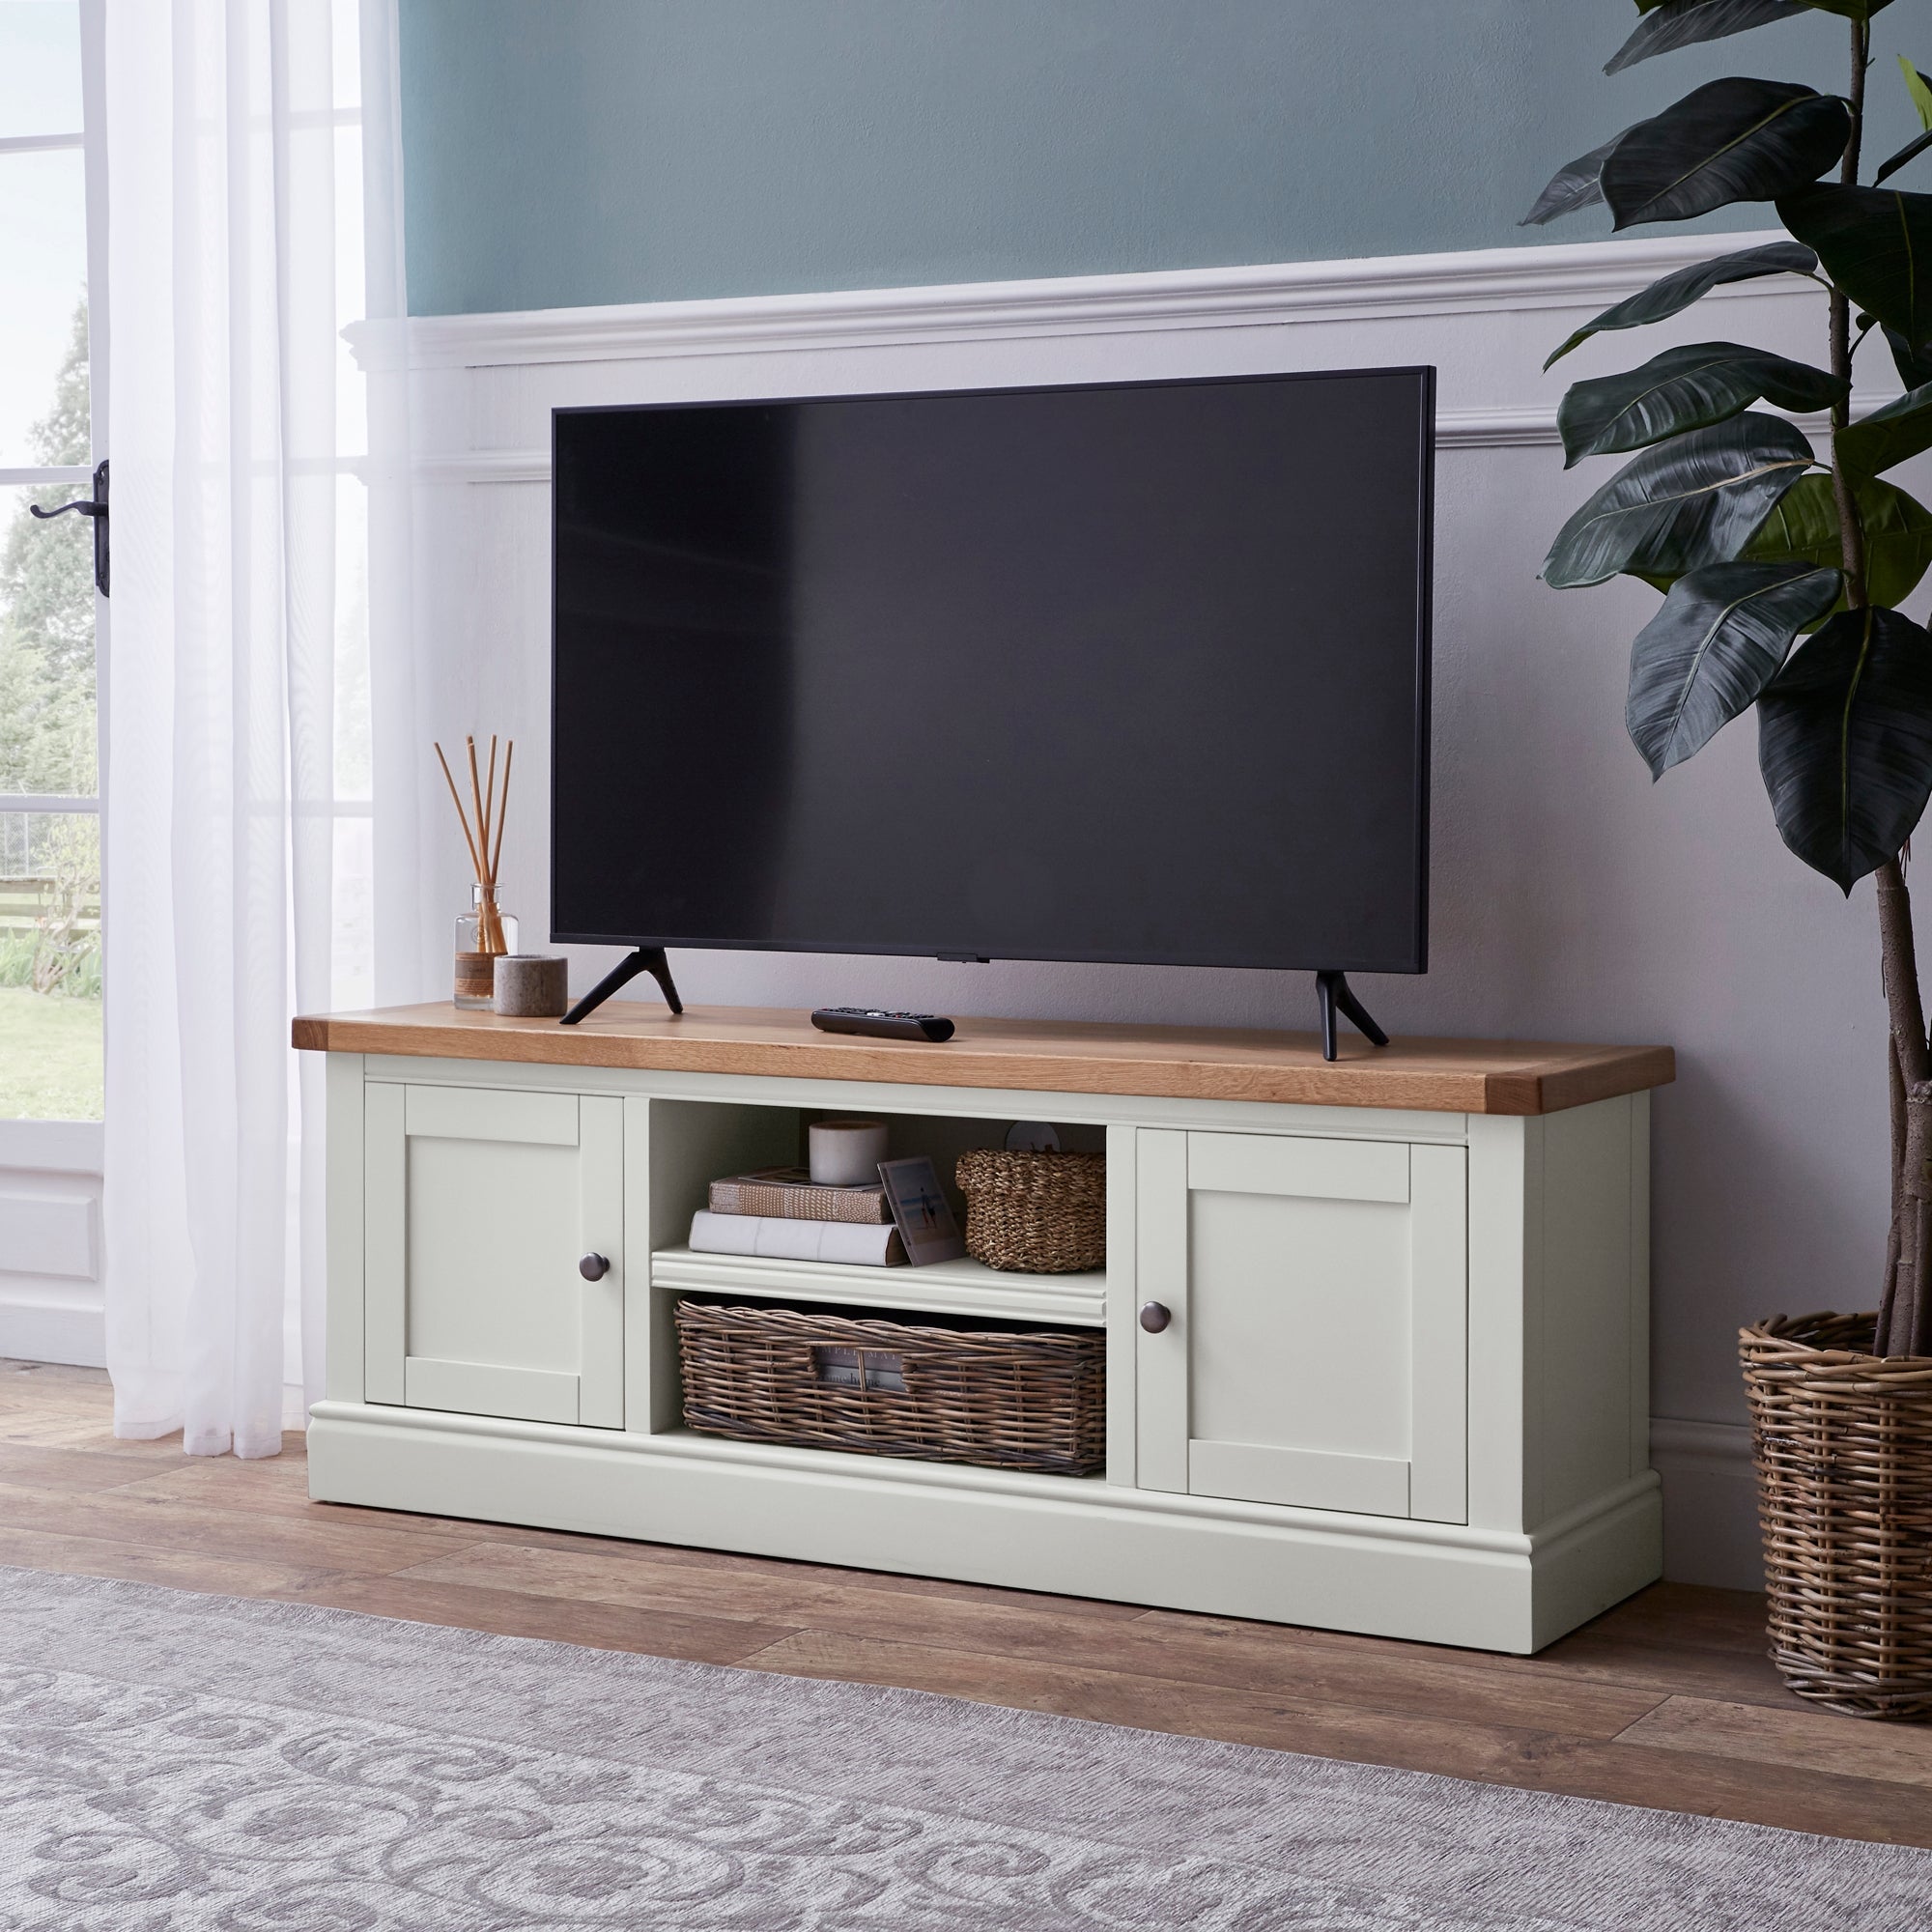 Compton Ivory Wide Tv Stand With Baskets Cream And Brown